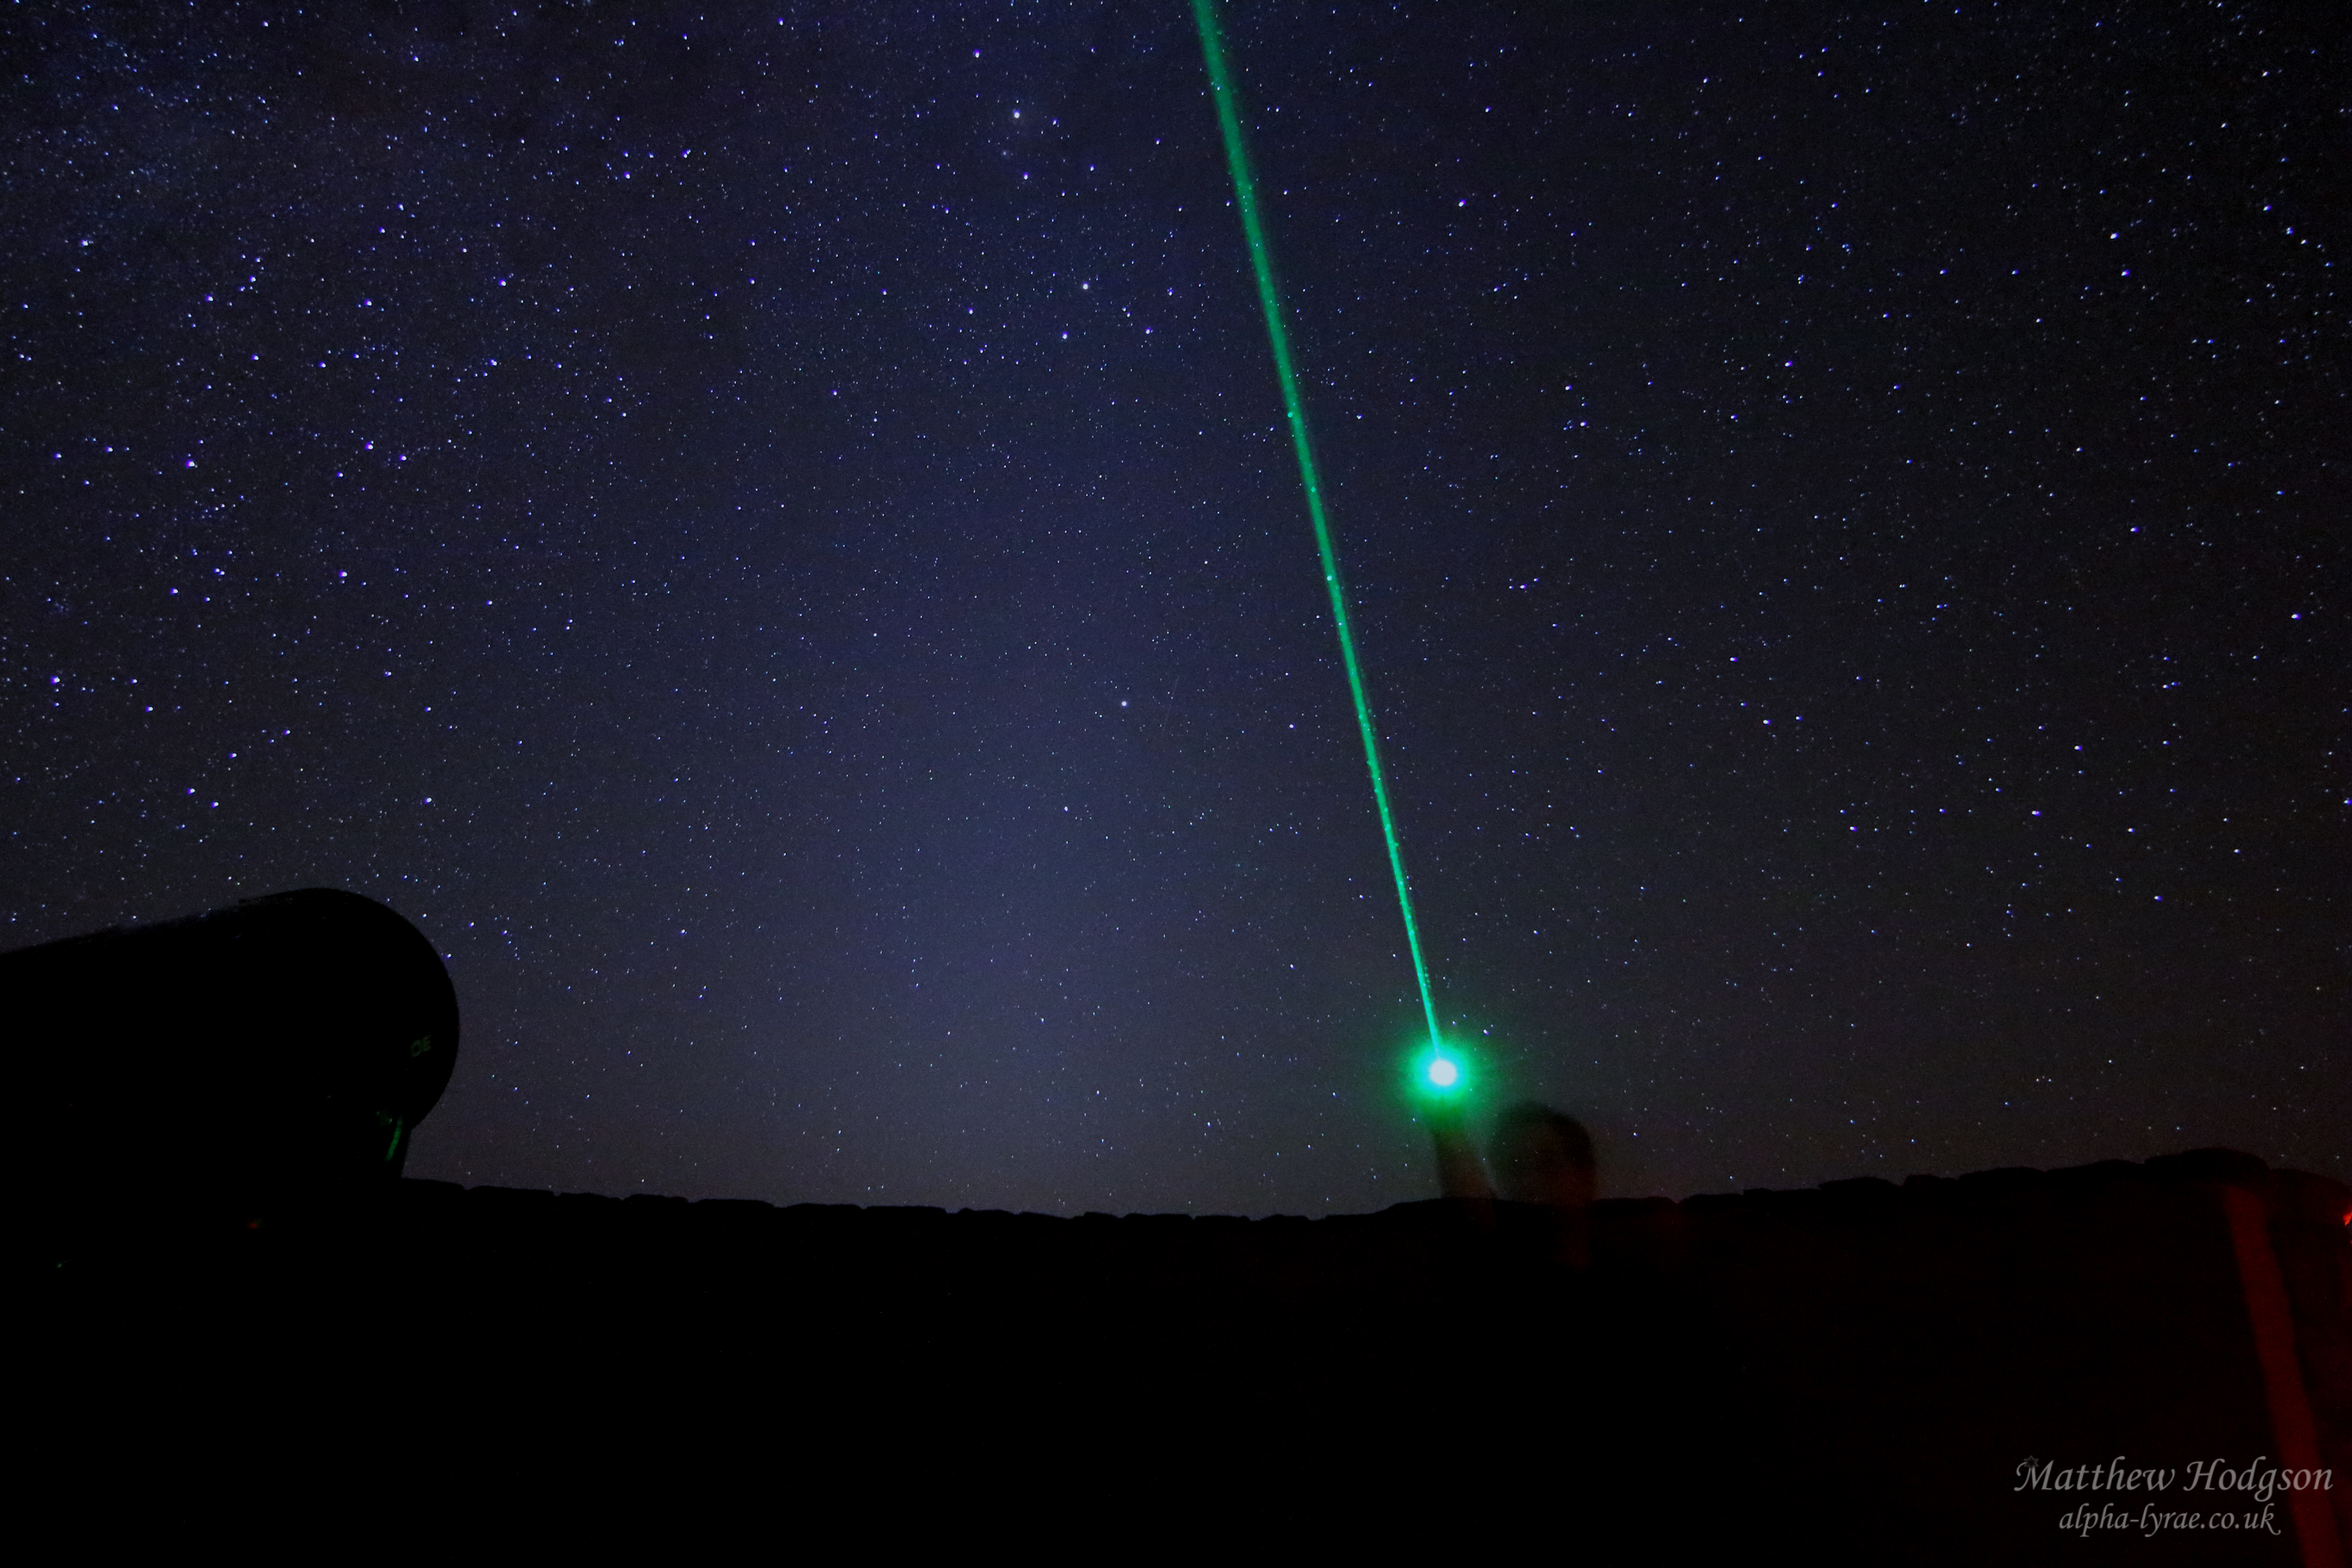 Guiding guests around the night sky with the zodiacal light as a backdrop.